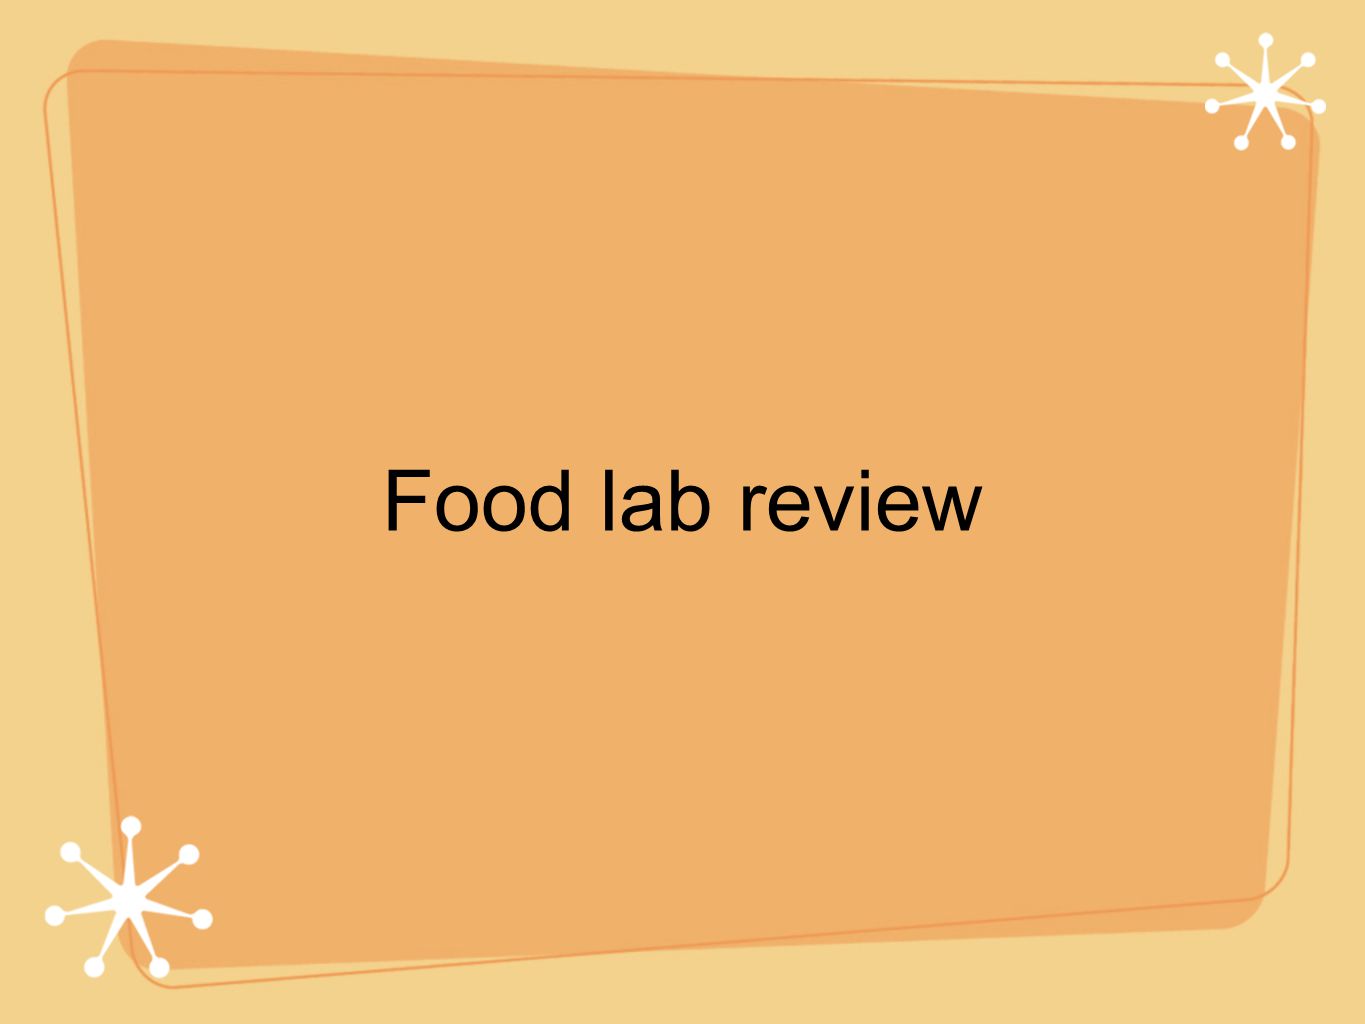 Food lab review